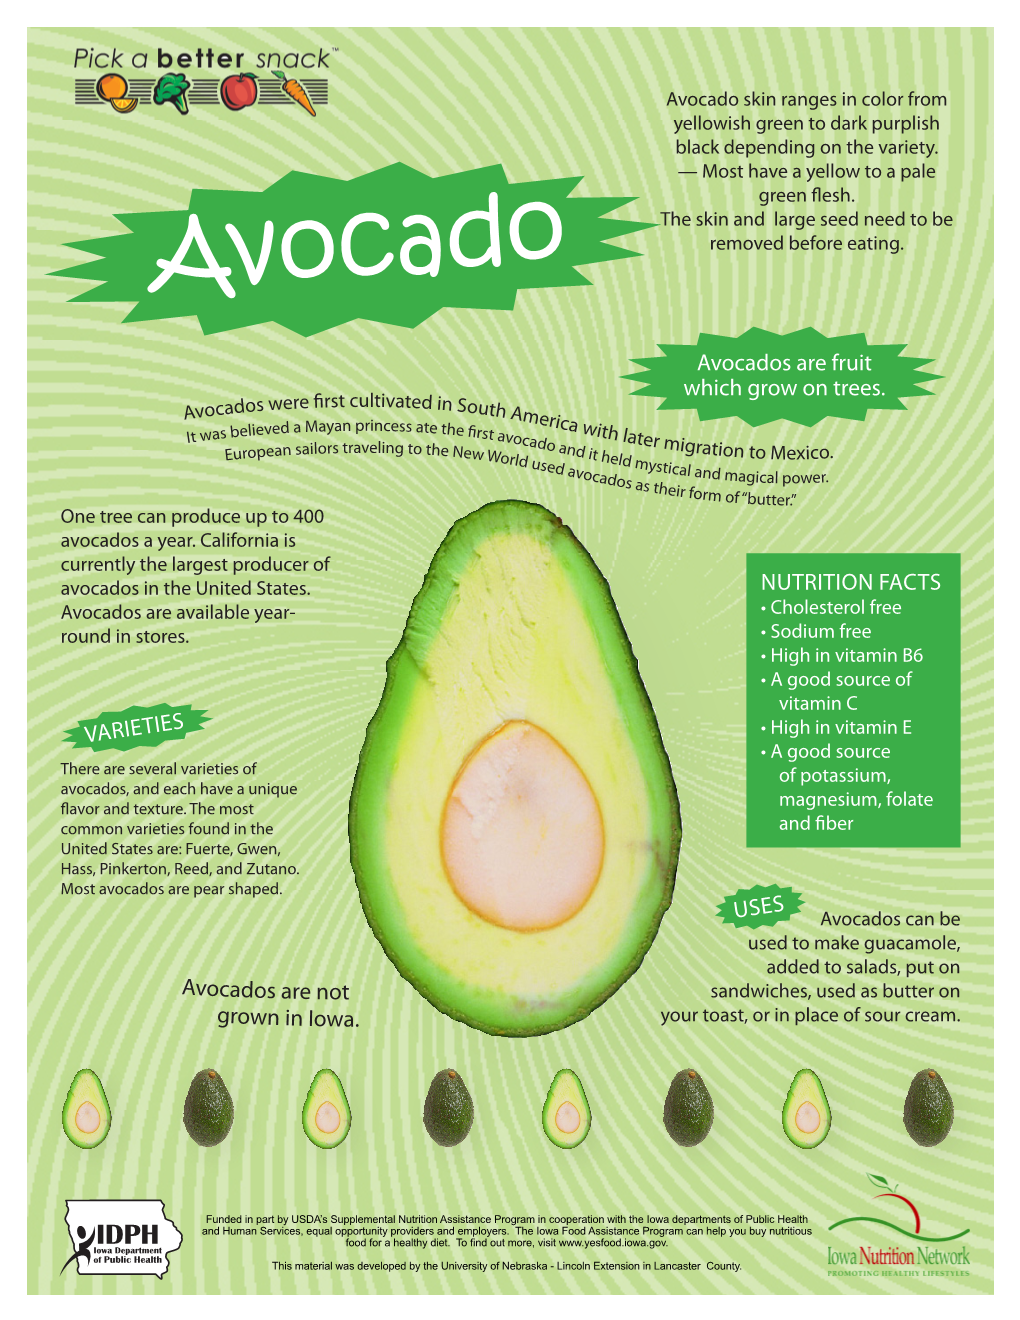 Avocado Skin Ranges in Color from Yellowish Green to Dark Purplish Black Depending on the Variety